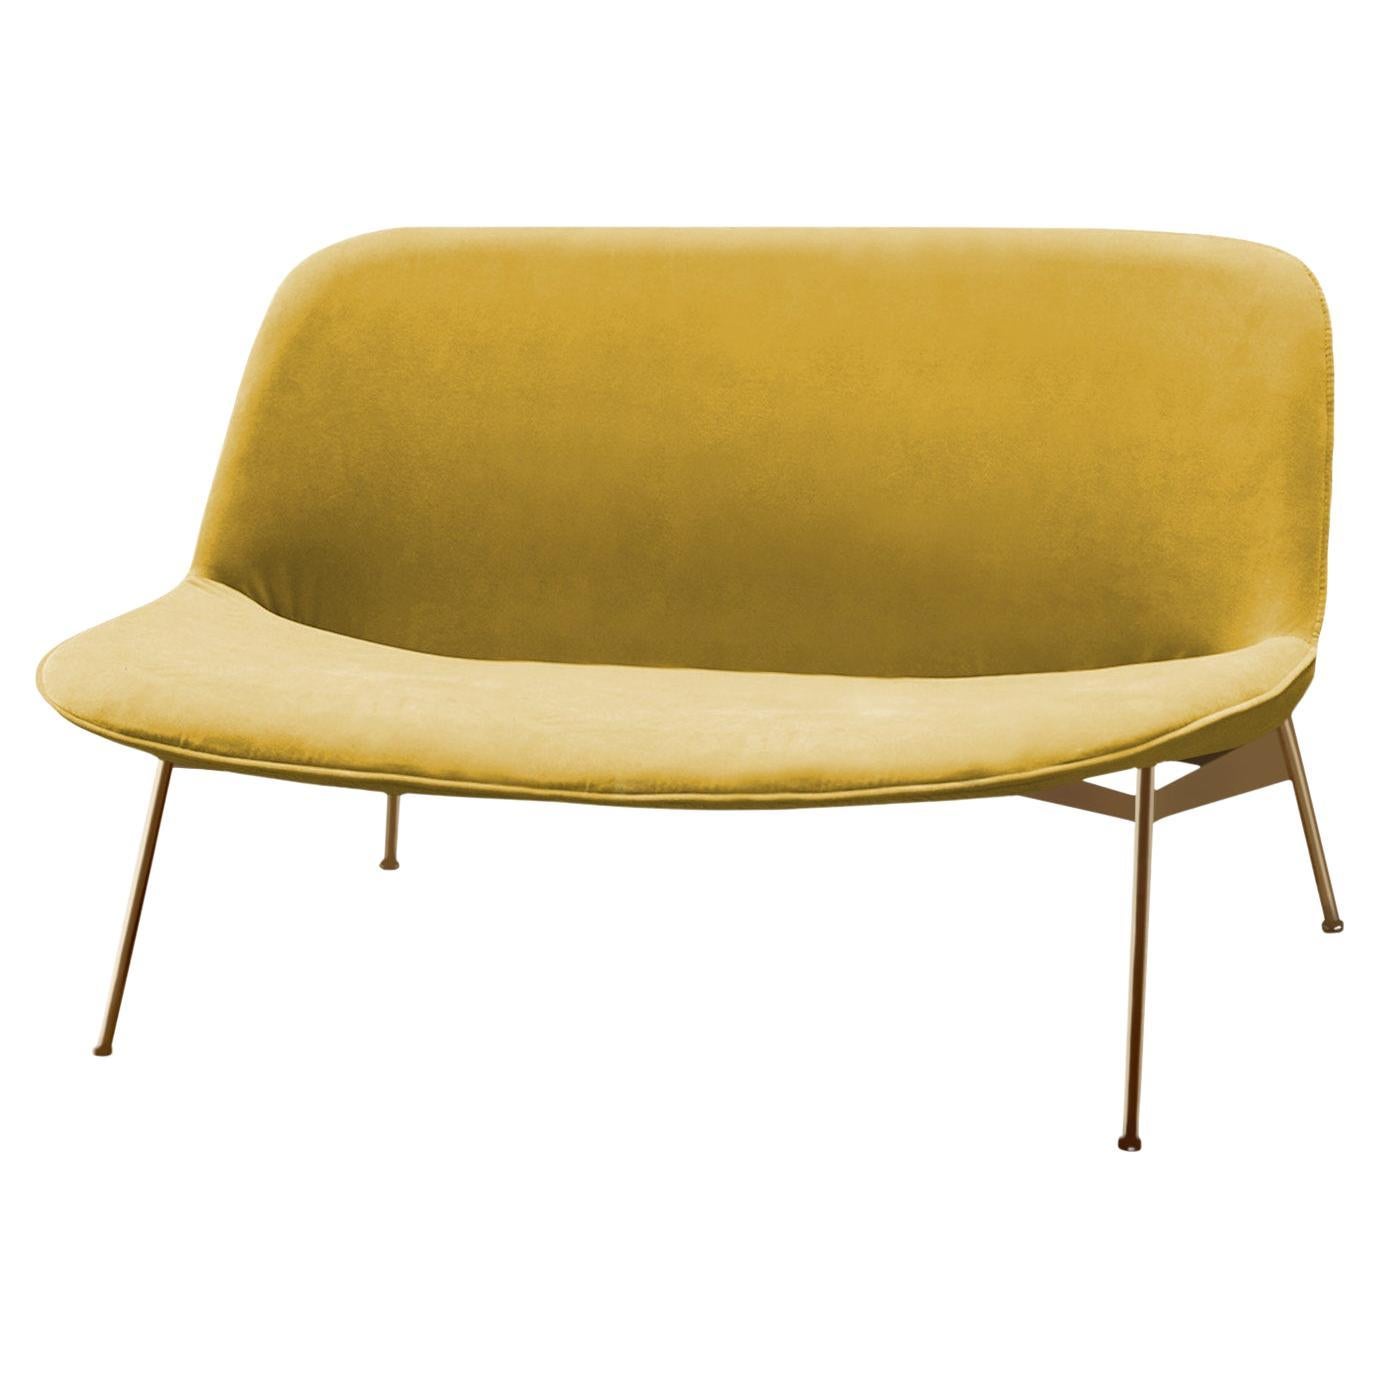 Chiado Sofa, Large with Corn and Gold